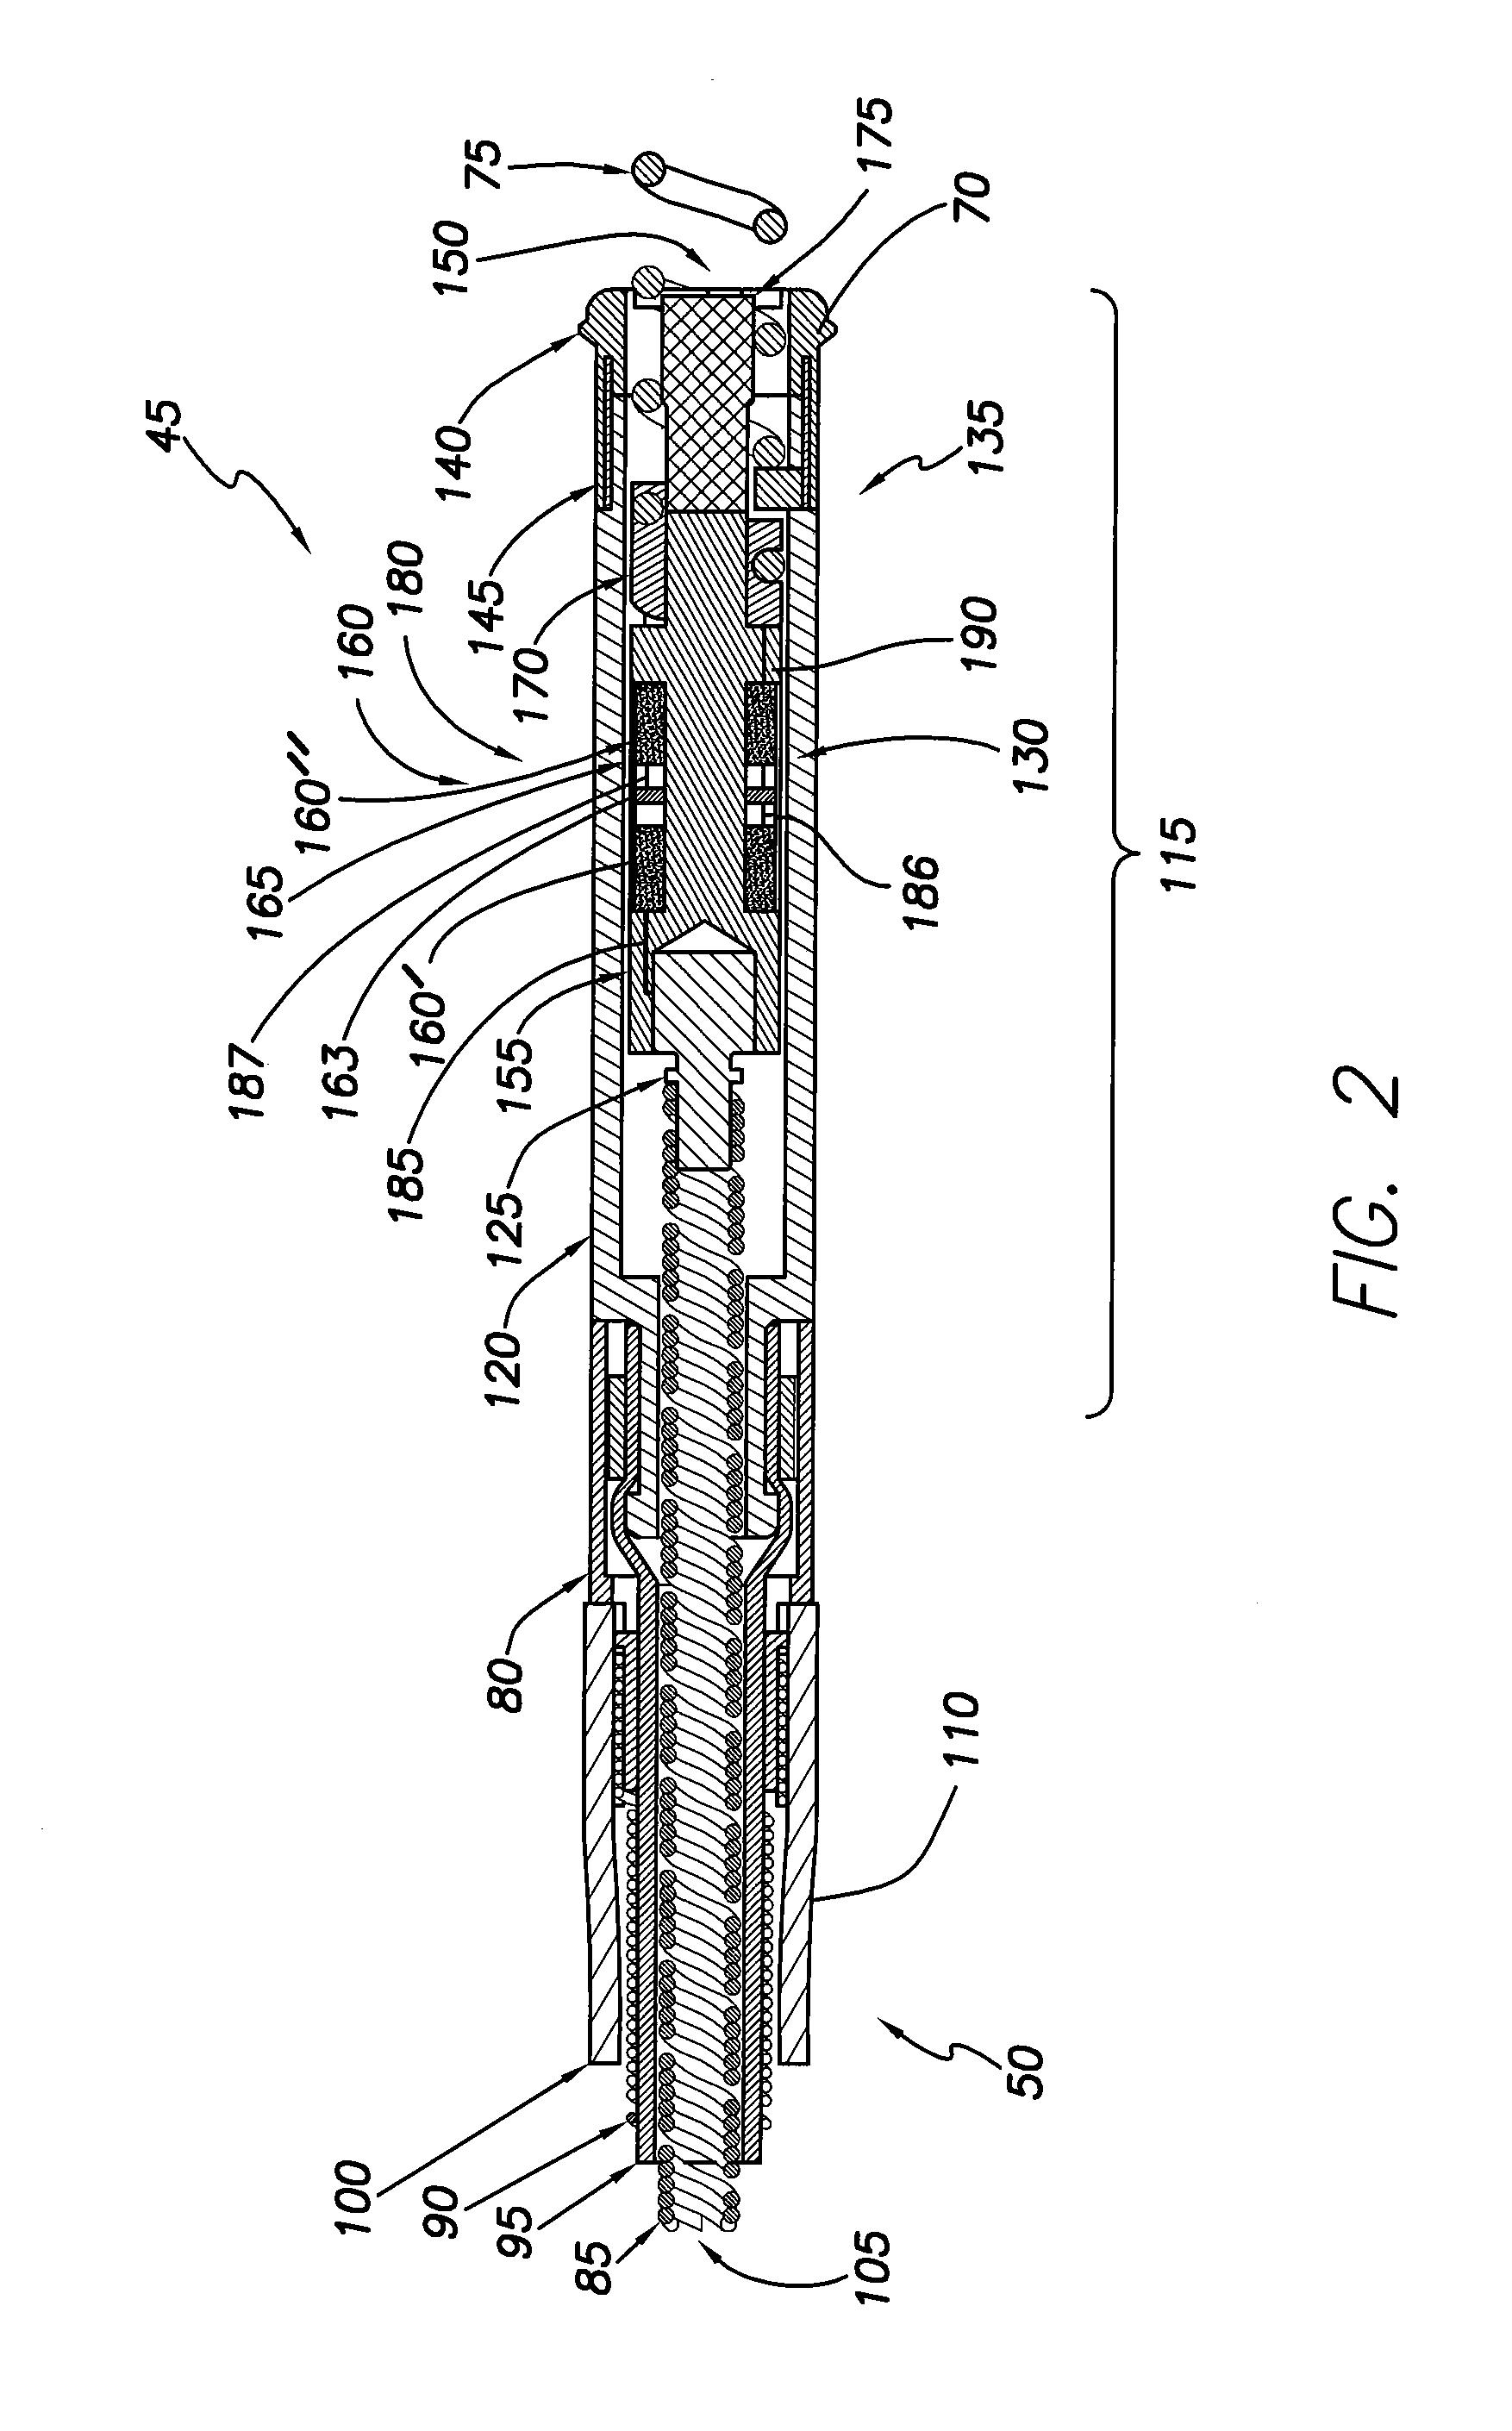 MRI compatible implantable medical lead and method of making same